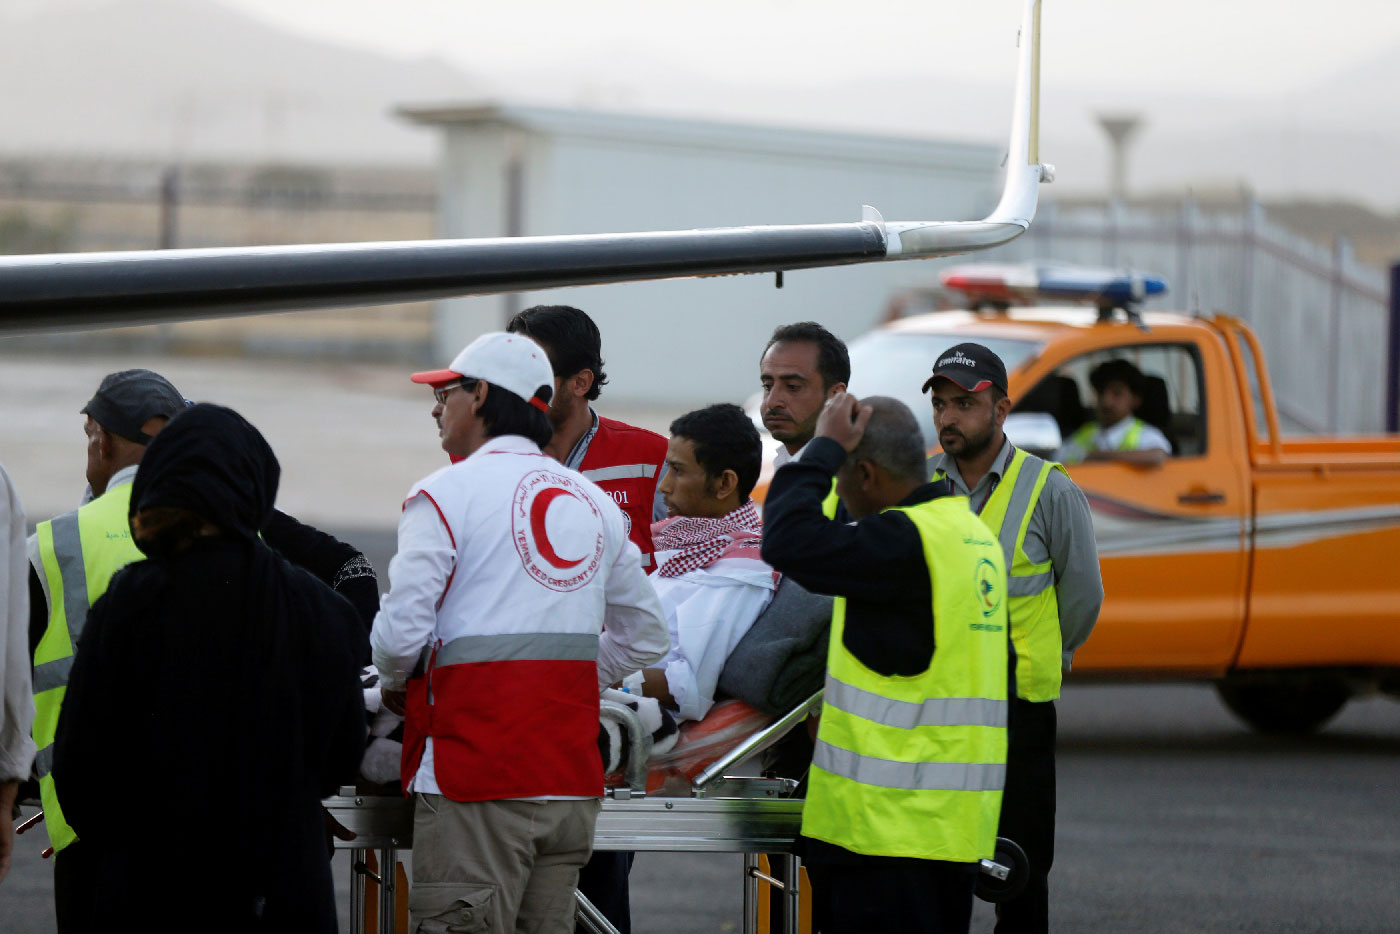 Saudi prisoner Moussa Awaji is taken on a stretcher to an ICRC plane at the Sanaa airport after he was released by the Huthis in Sanaa, Yemen January 29, 2019.